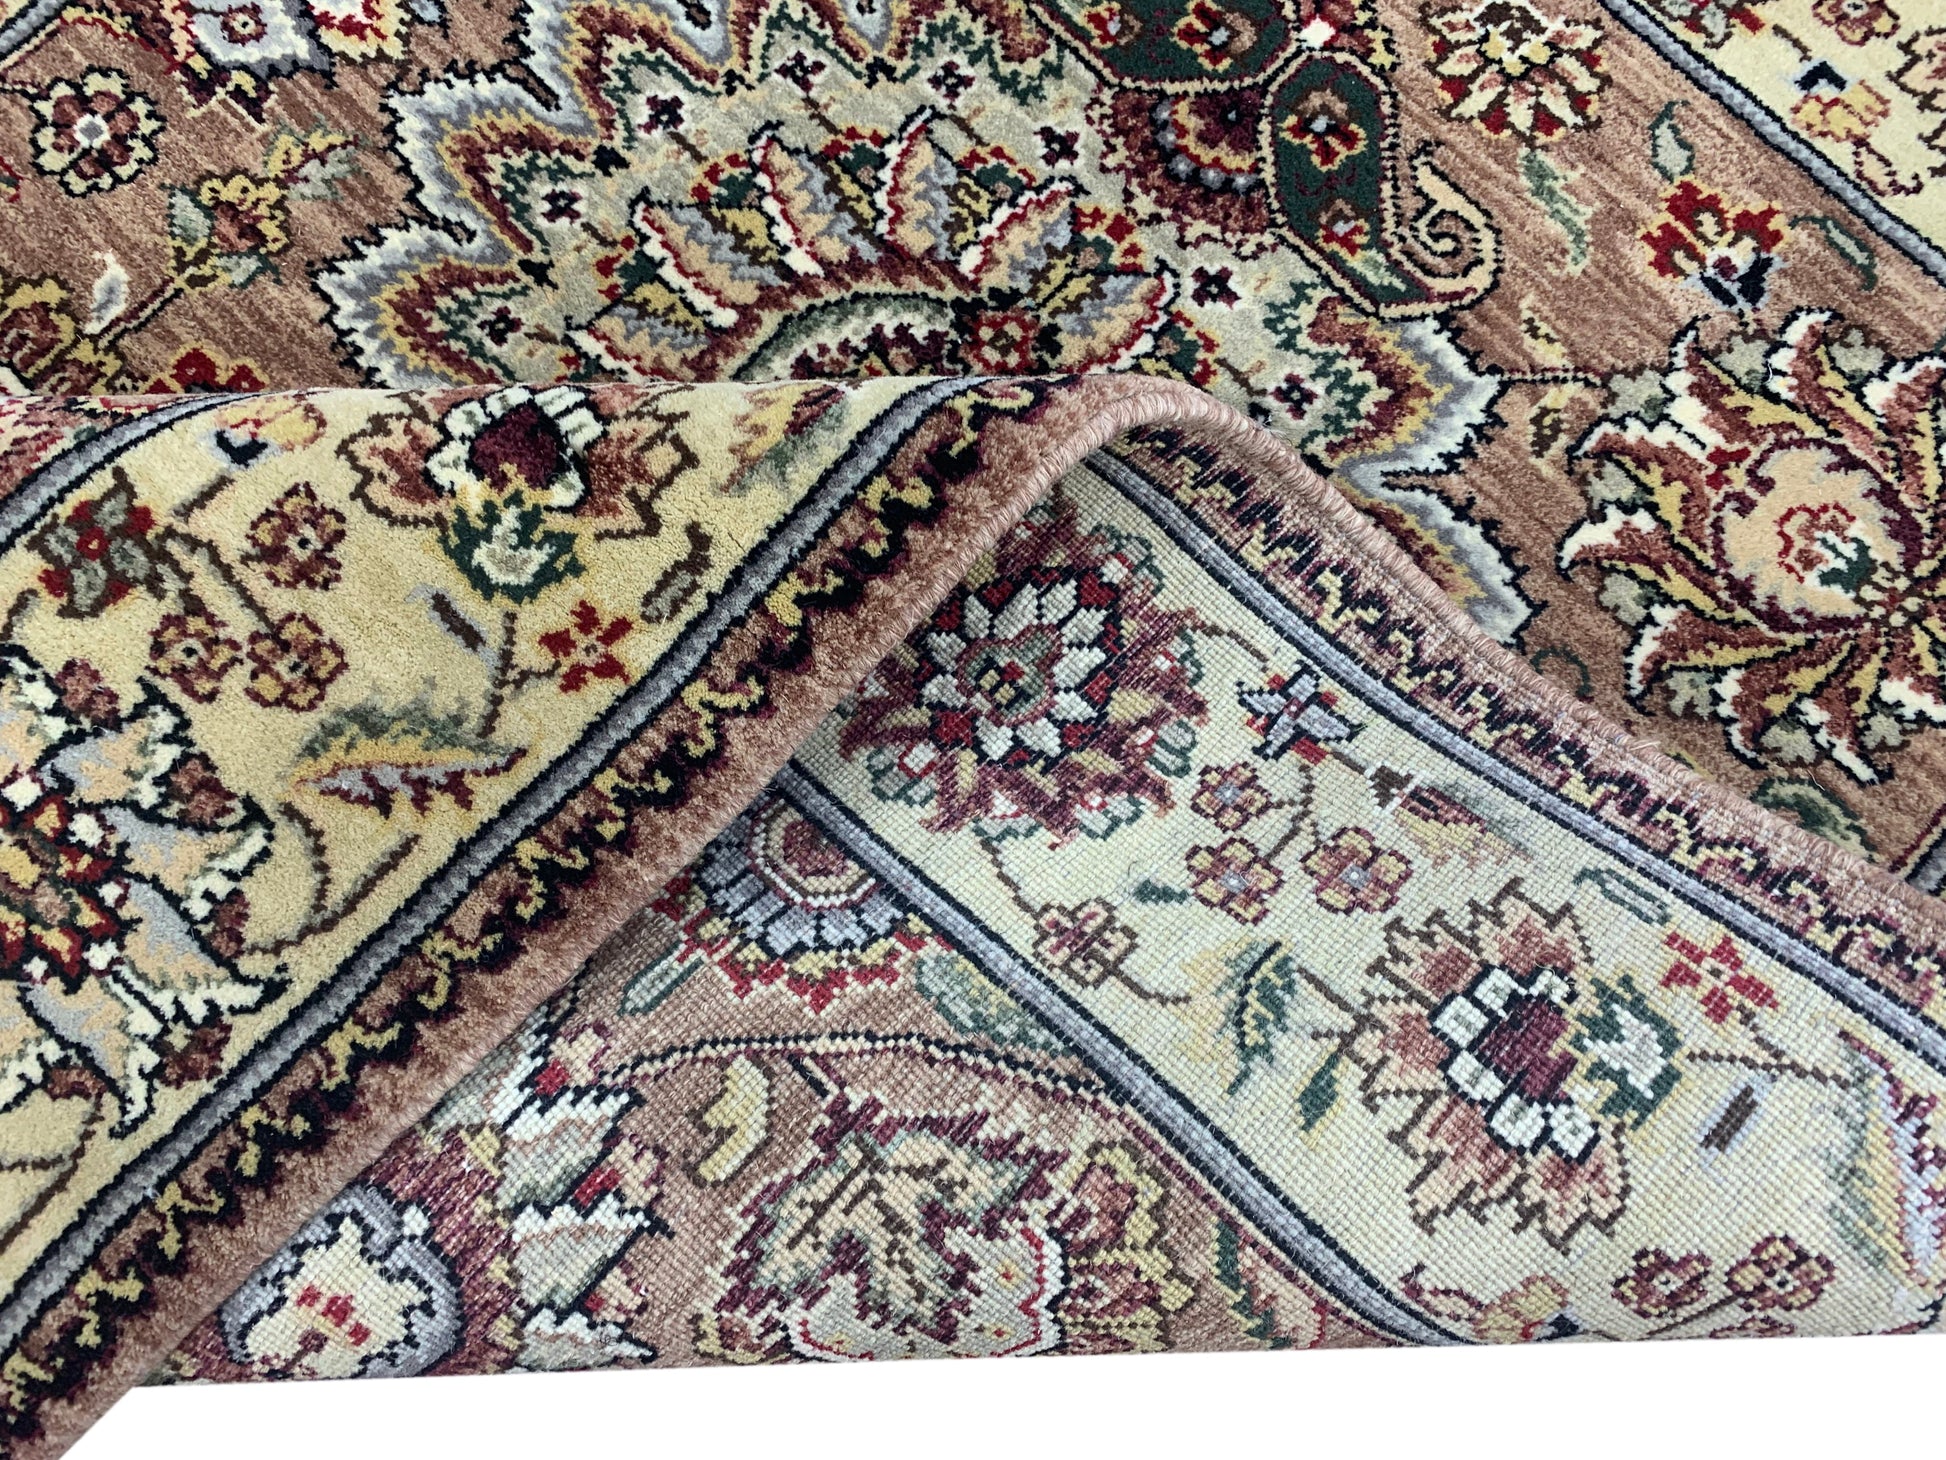 Get trendy with Rust Ivory Pure Wool Traditional Handknotted Area Rug 3.2x4.11ft 96x150Cms - Traditional Rugs available at Jaipur Oriental Rugs. Grab yours for $655.00 today!